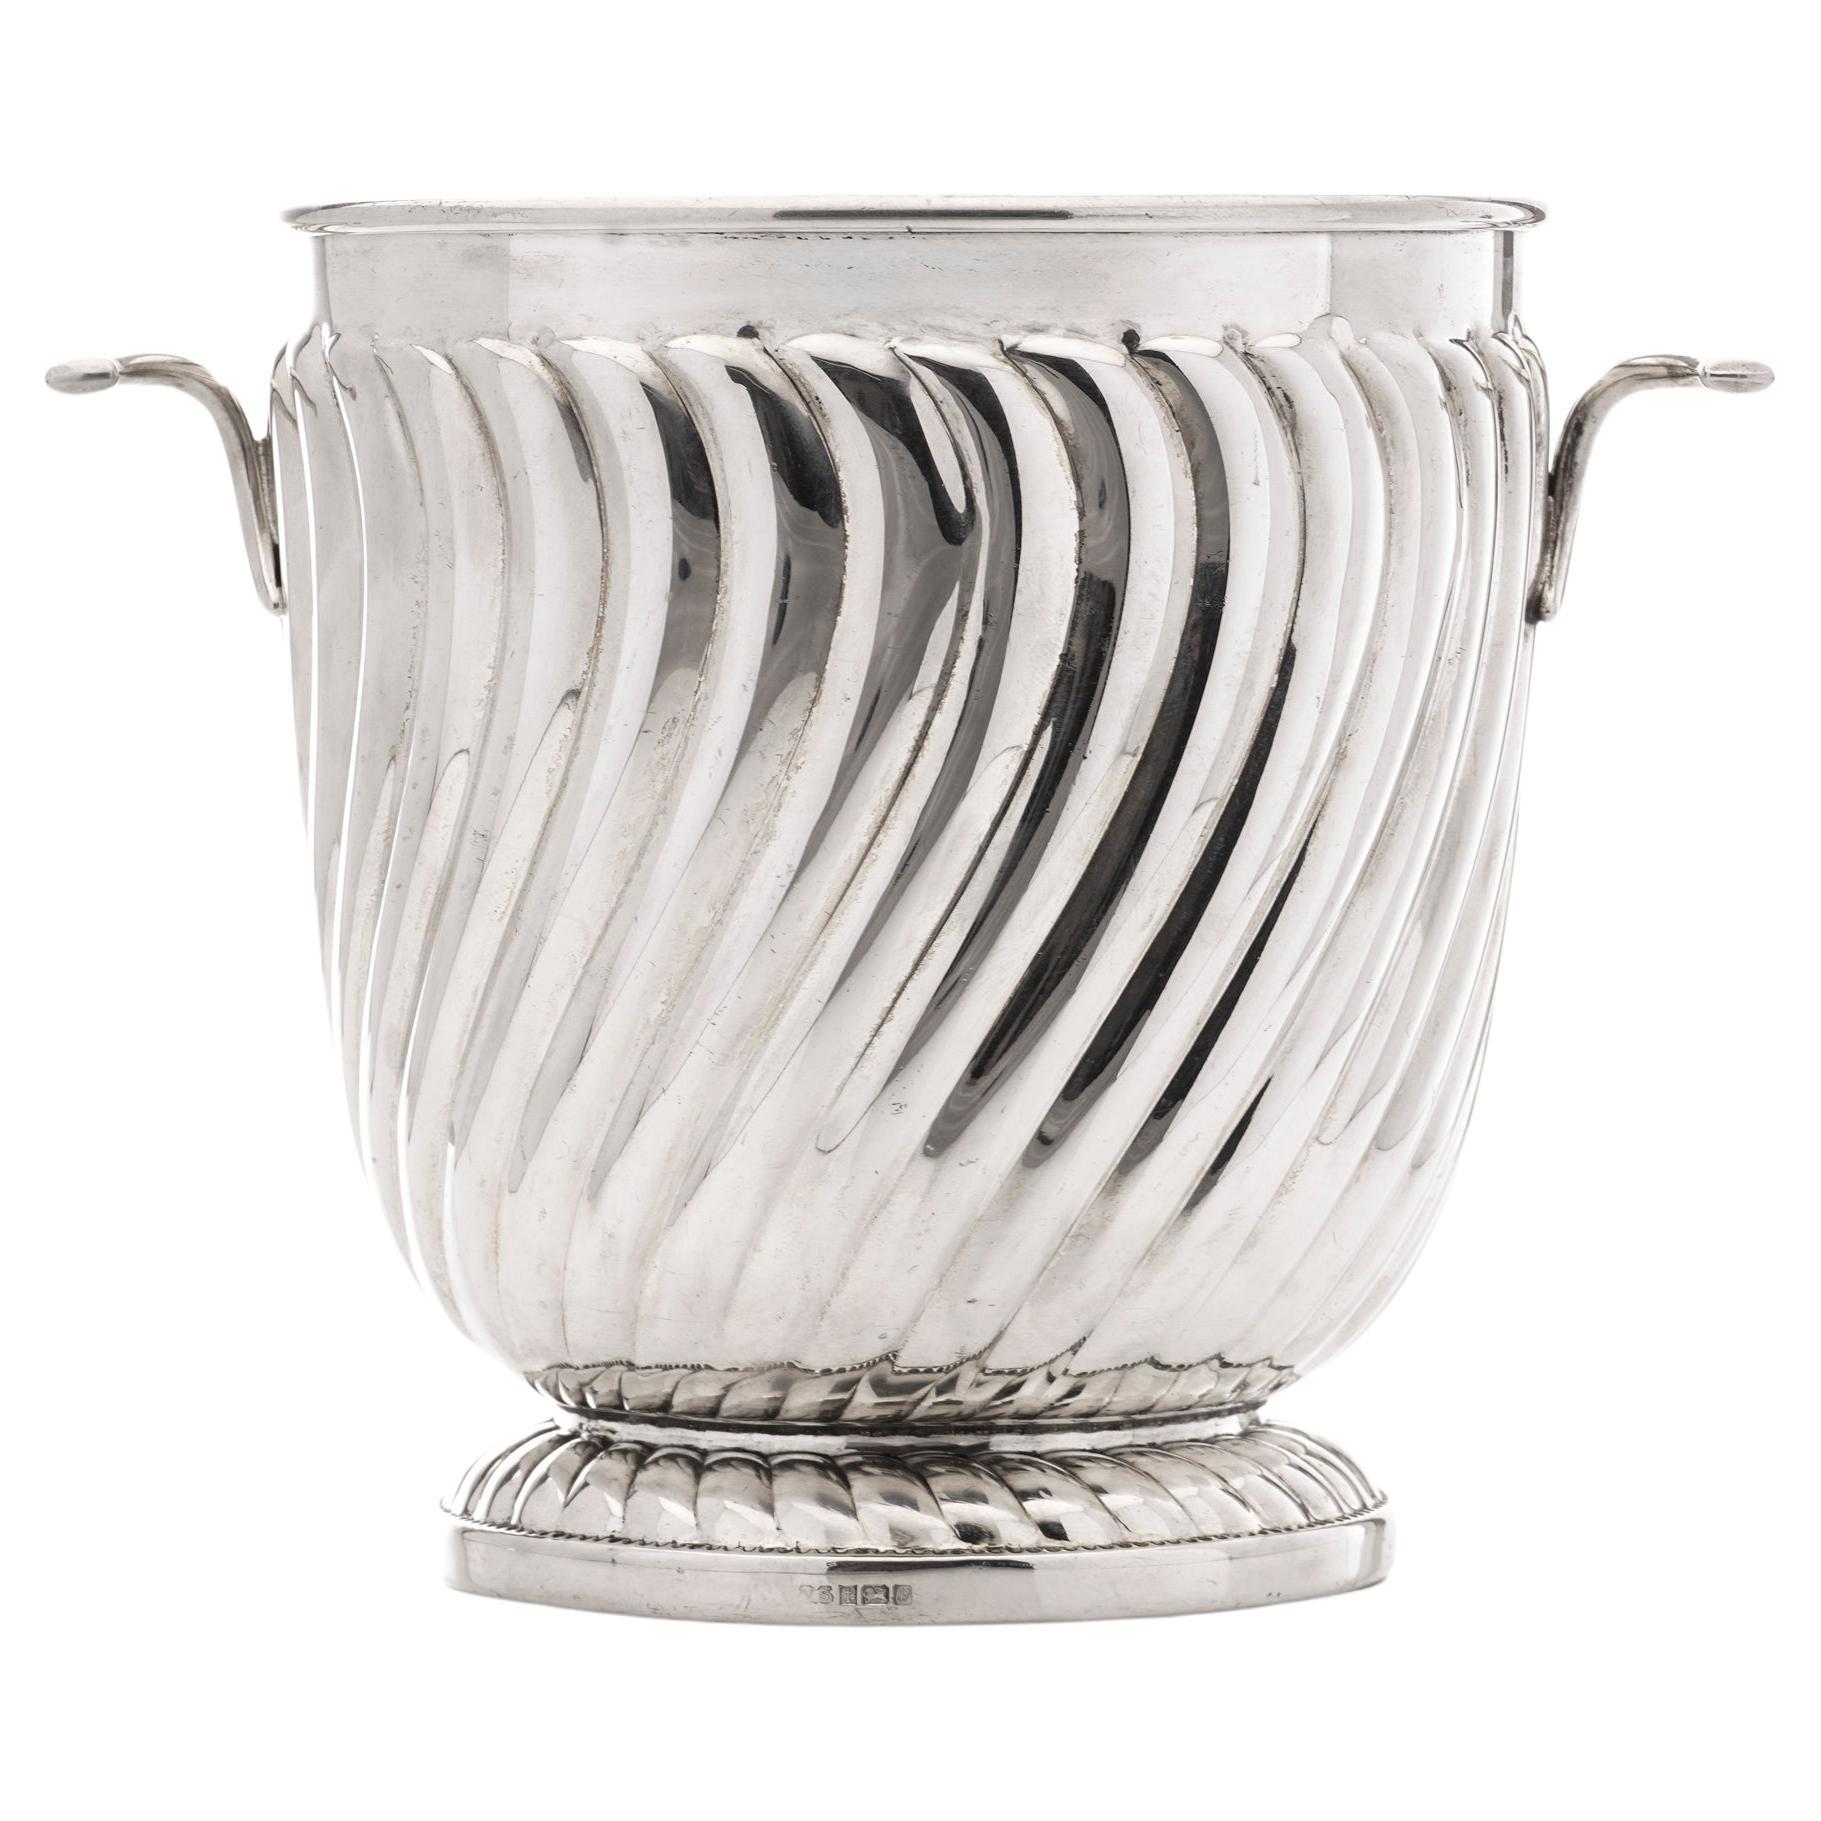 Late 20th century 925 sterling silver bowl 